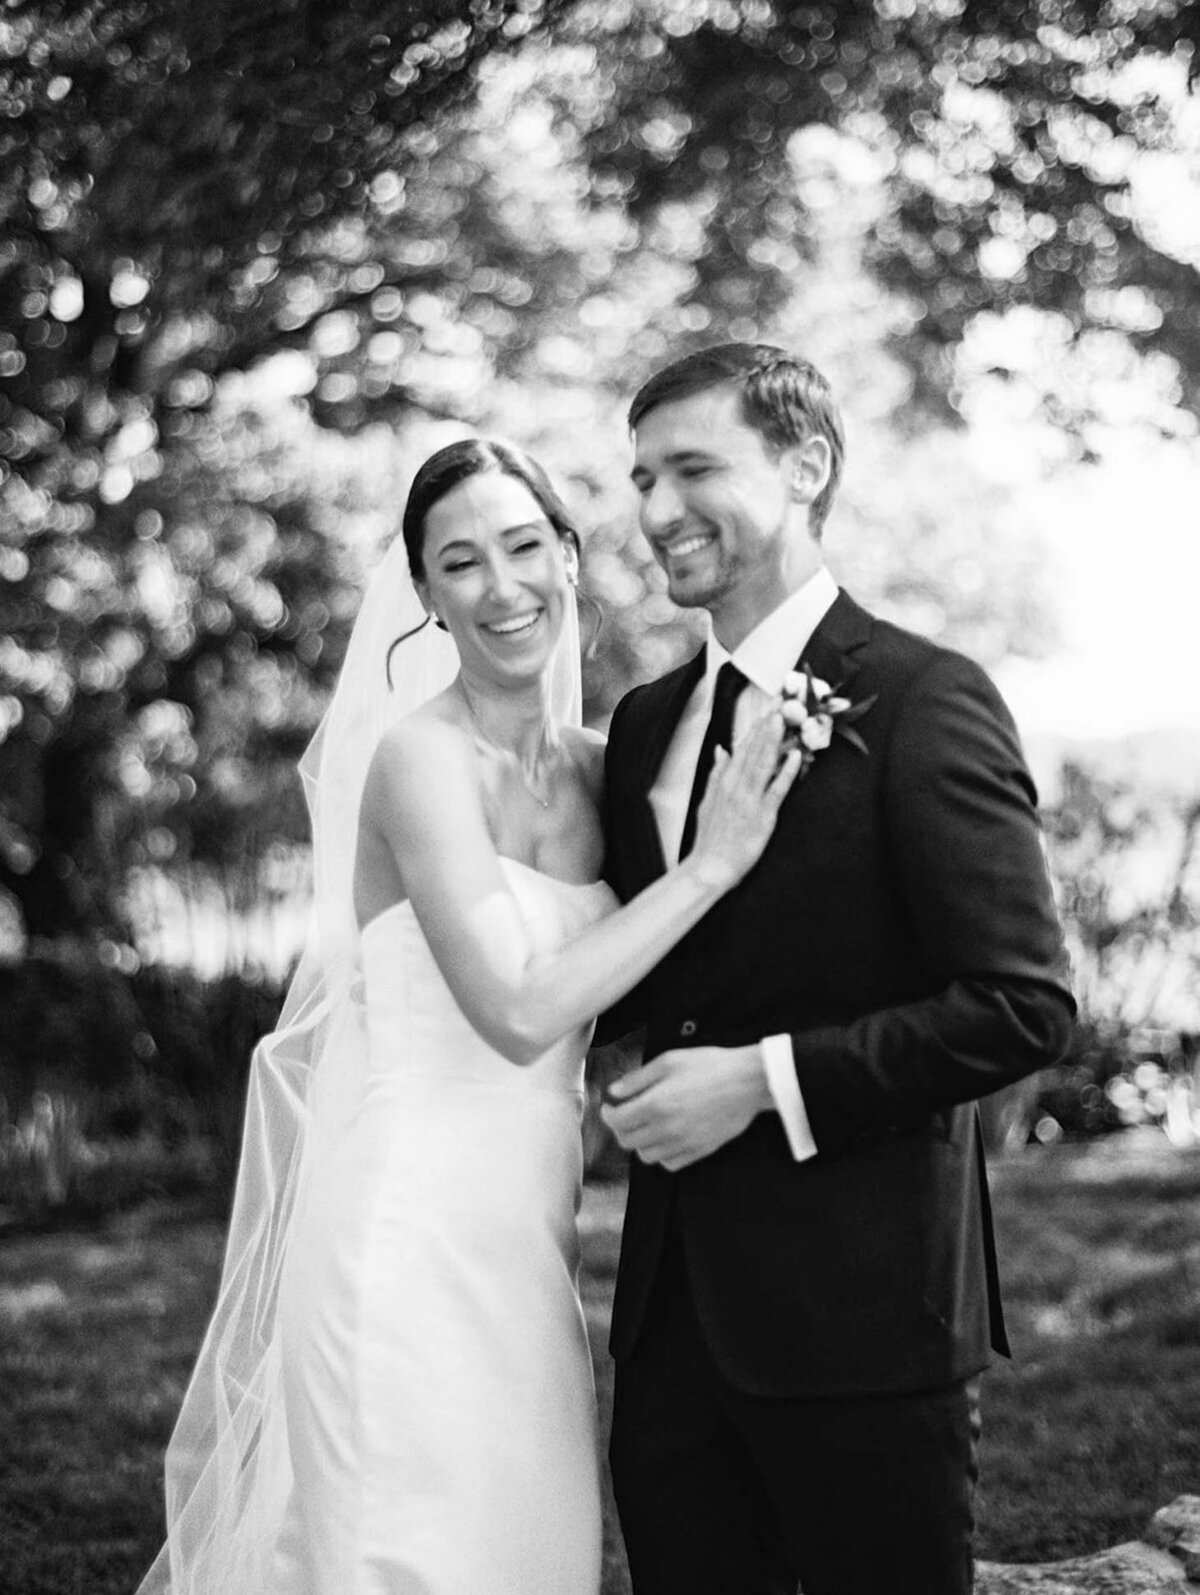 A black and white image of a bride and groom as they smile with joy